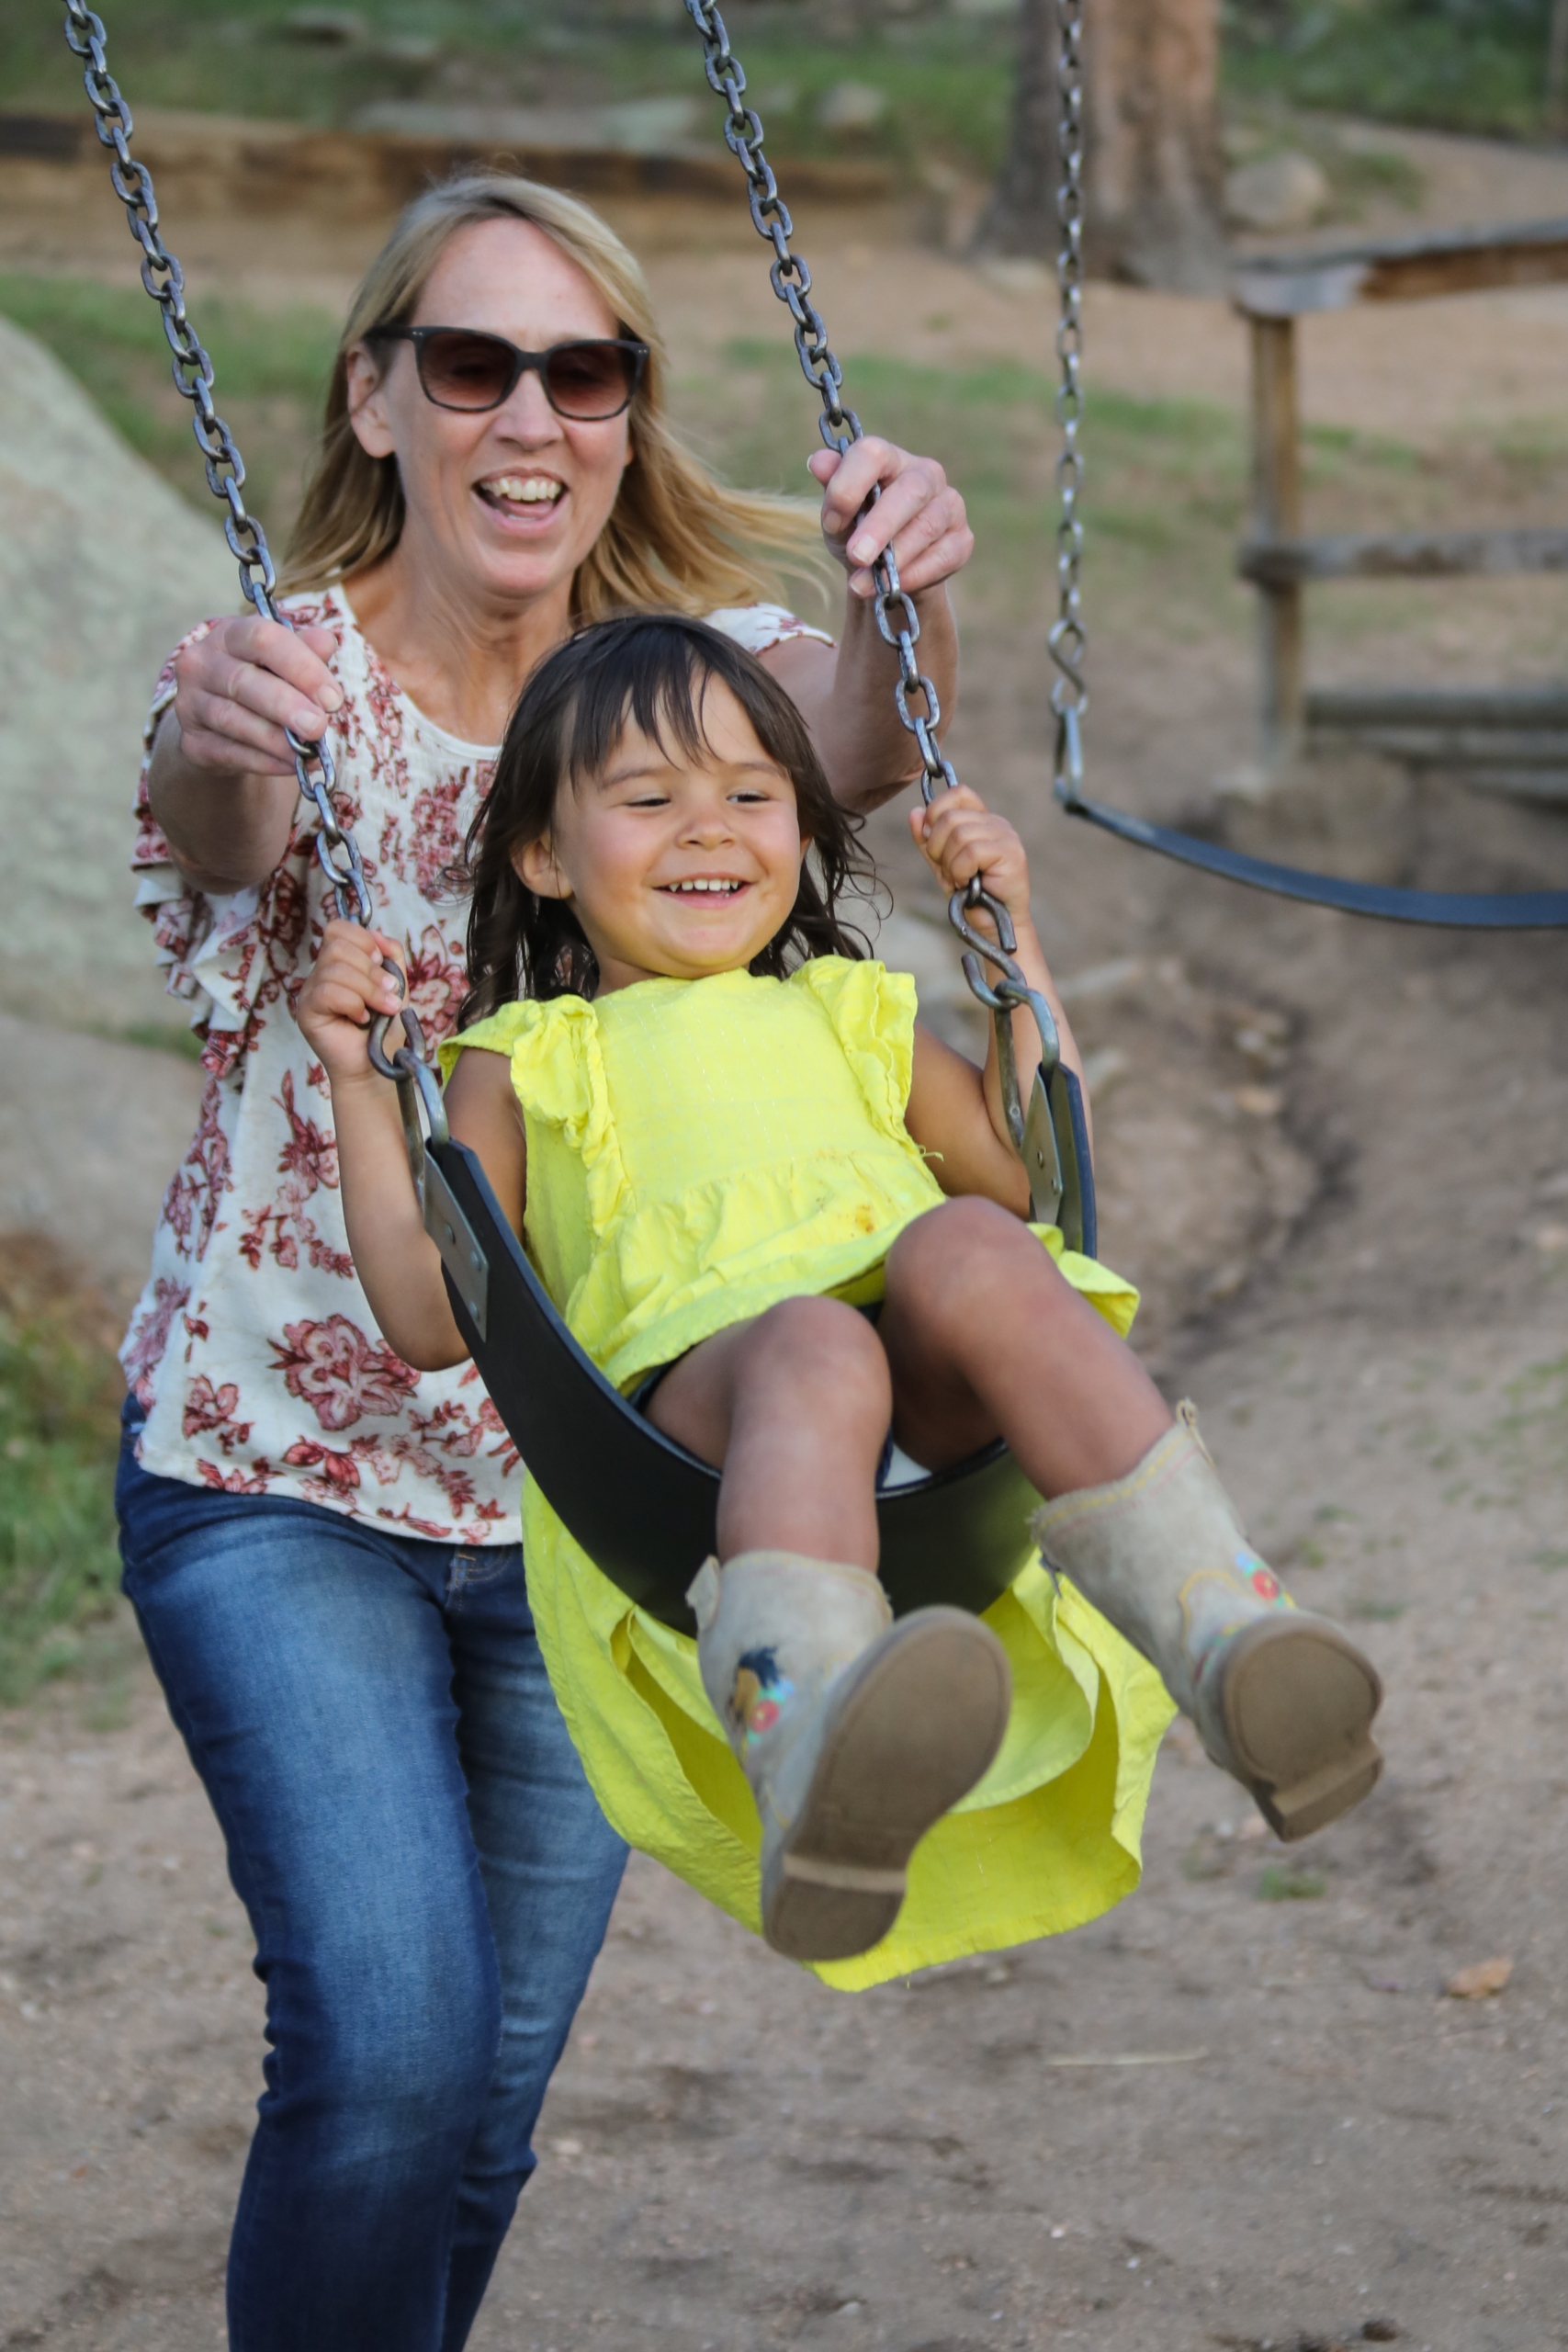 Adult pushing a child on a swing